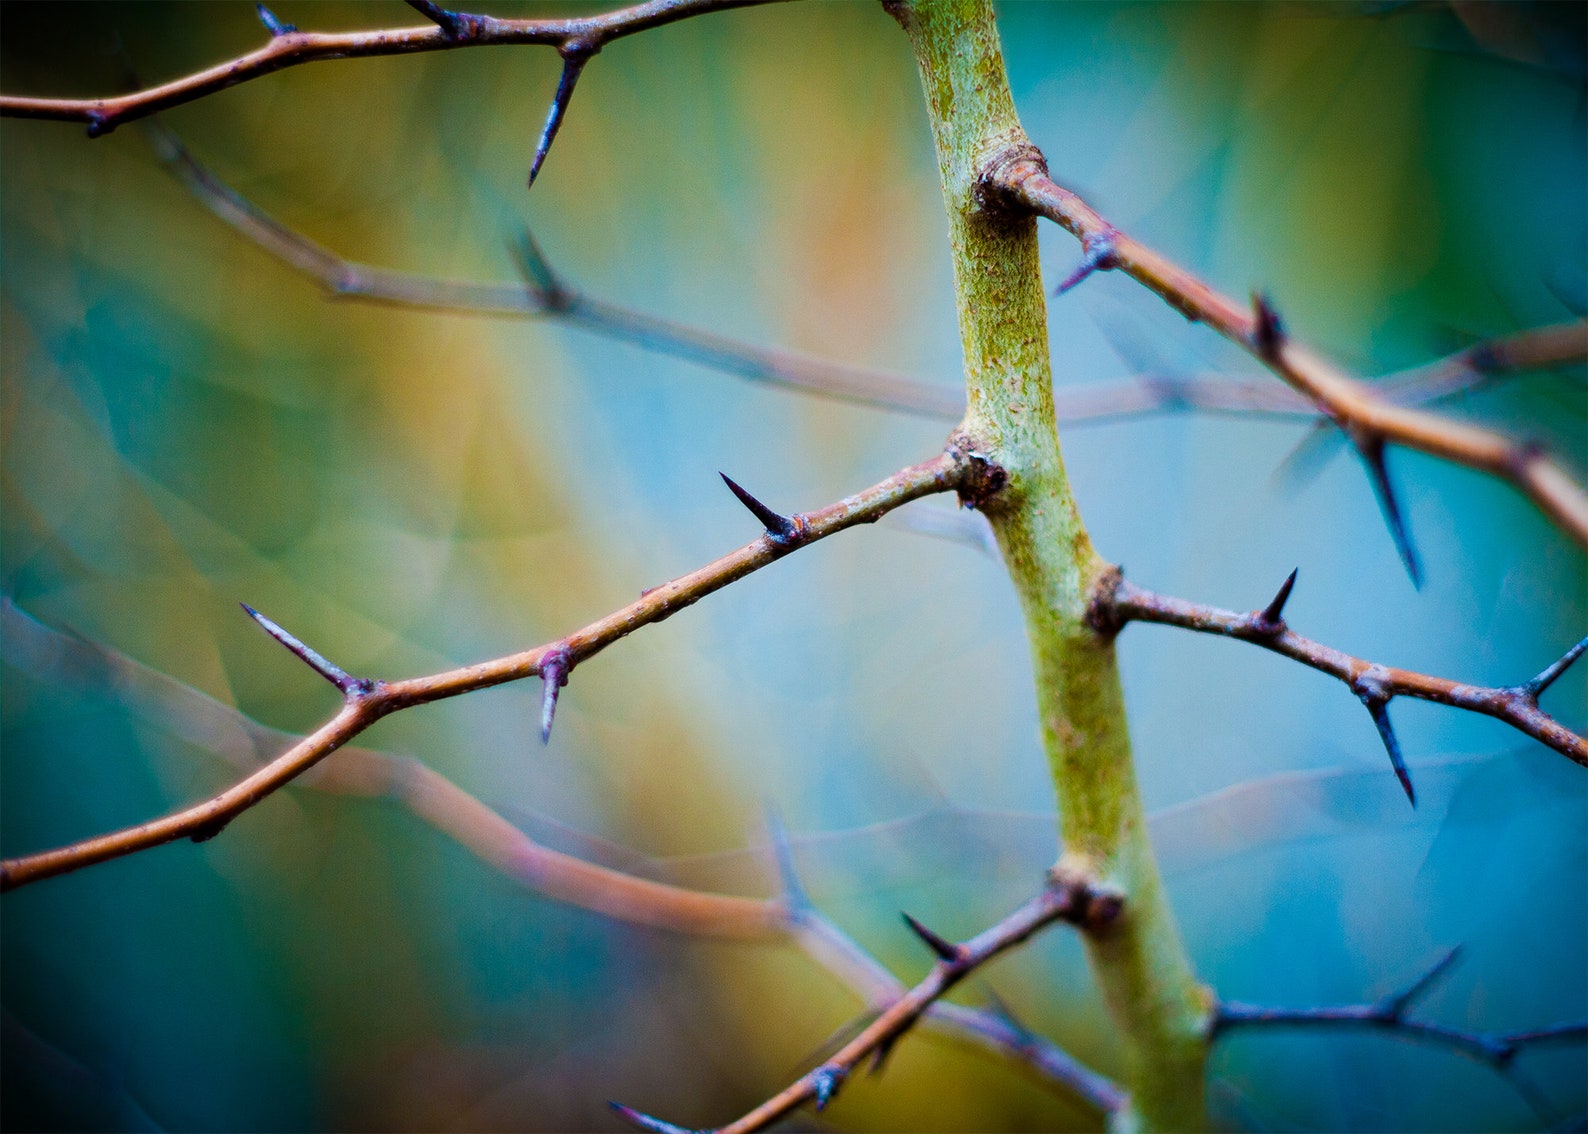 Thorns on Blue and Teal Background Nature Photography - Etsy